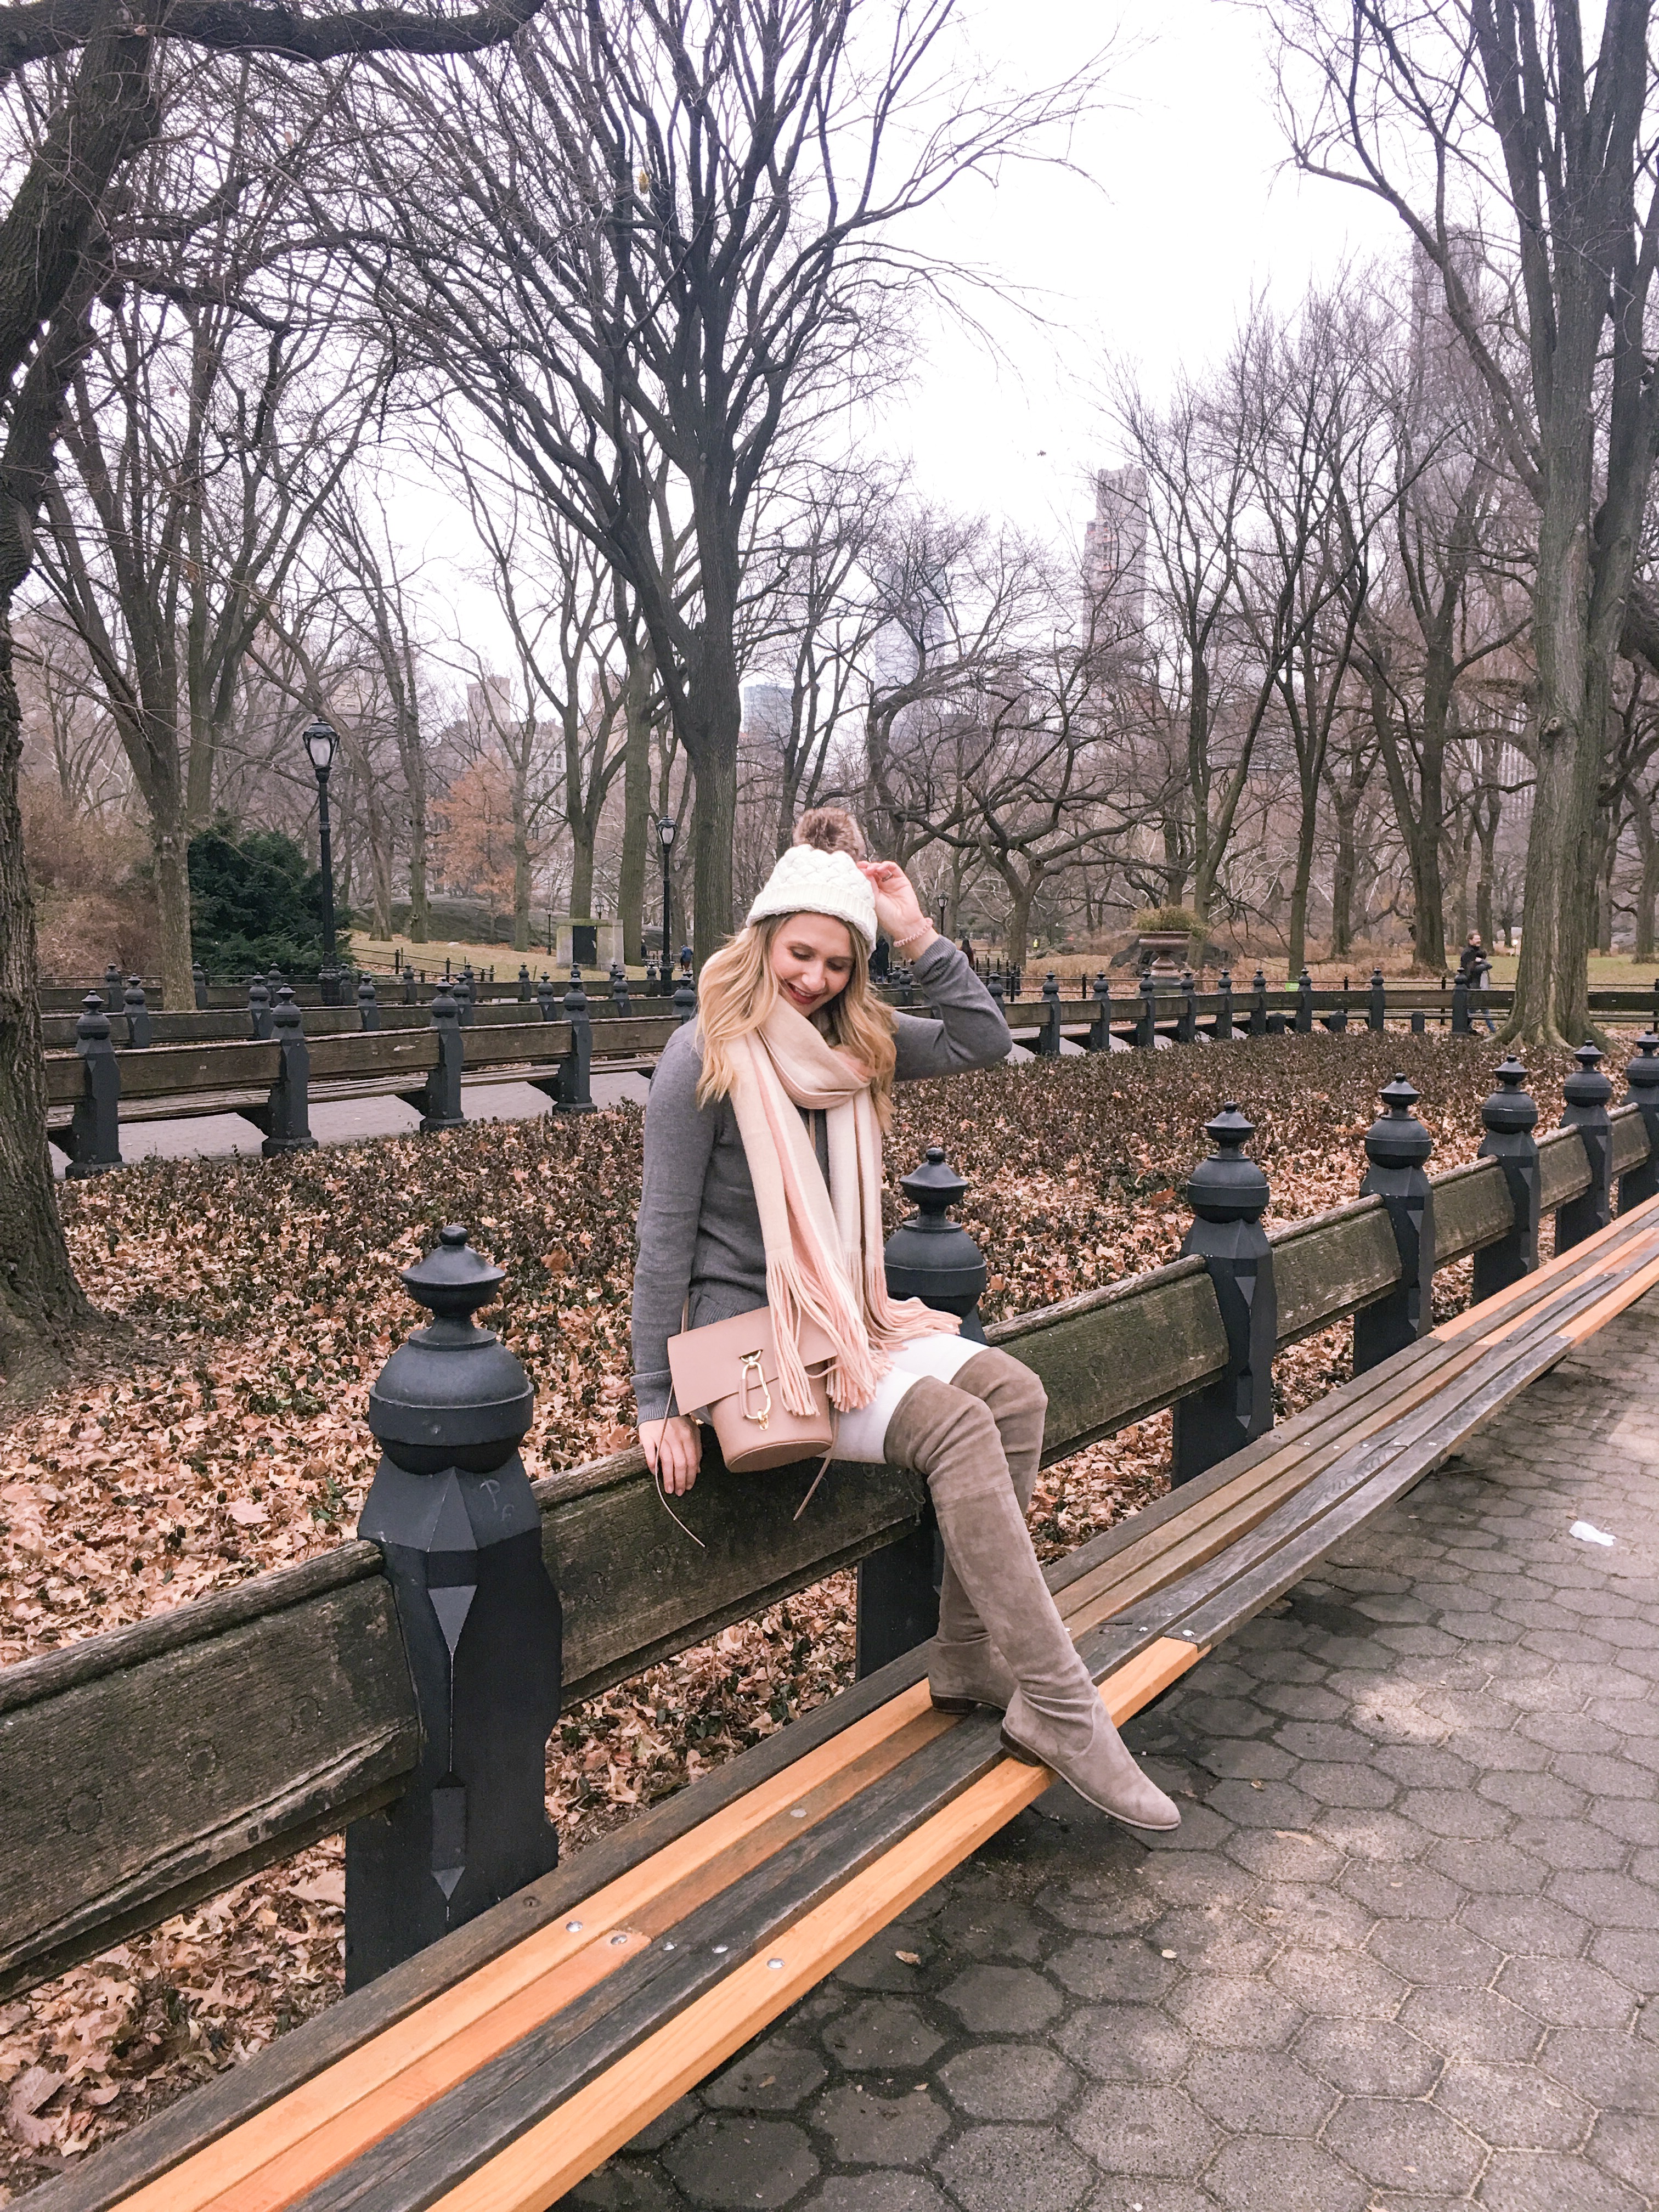 walk through central park nyc - A Weekend In New York by popular Chicago travel blogger Visions of Vogue